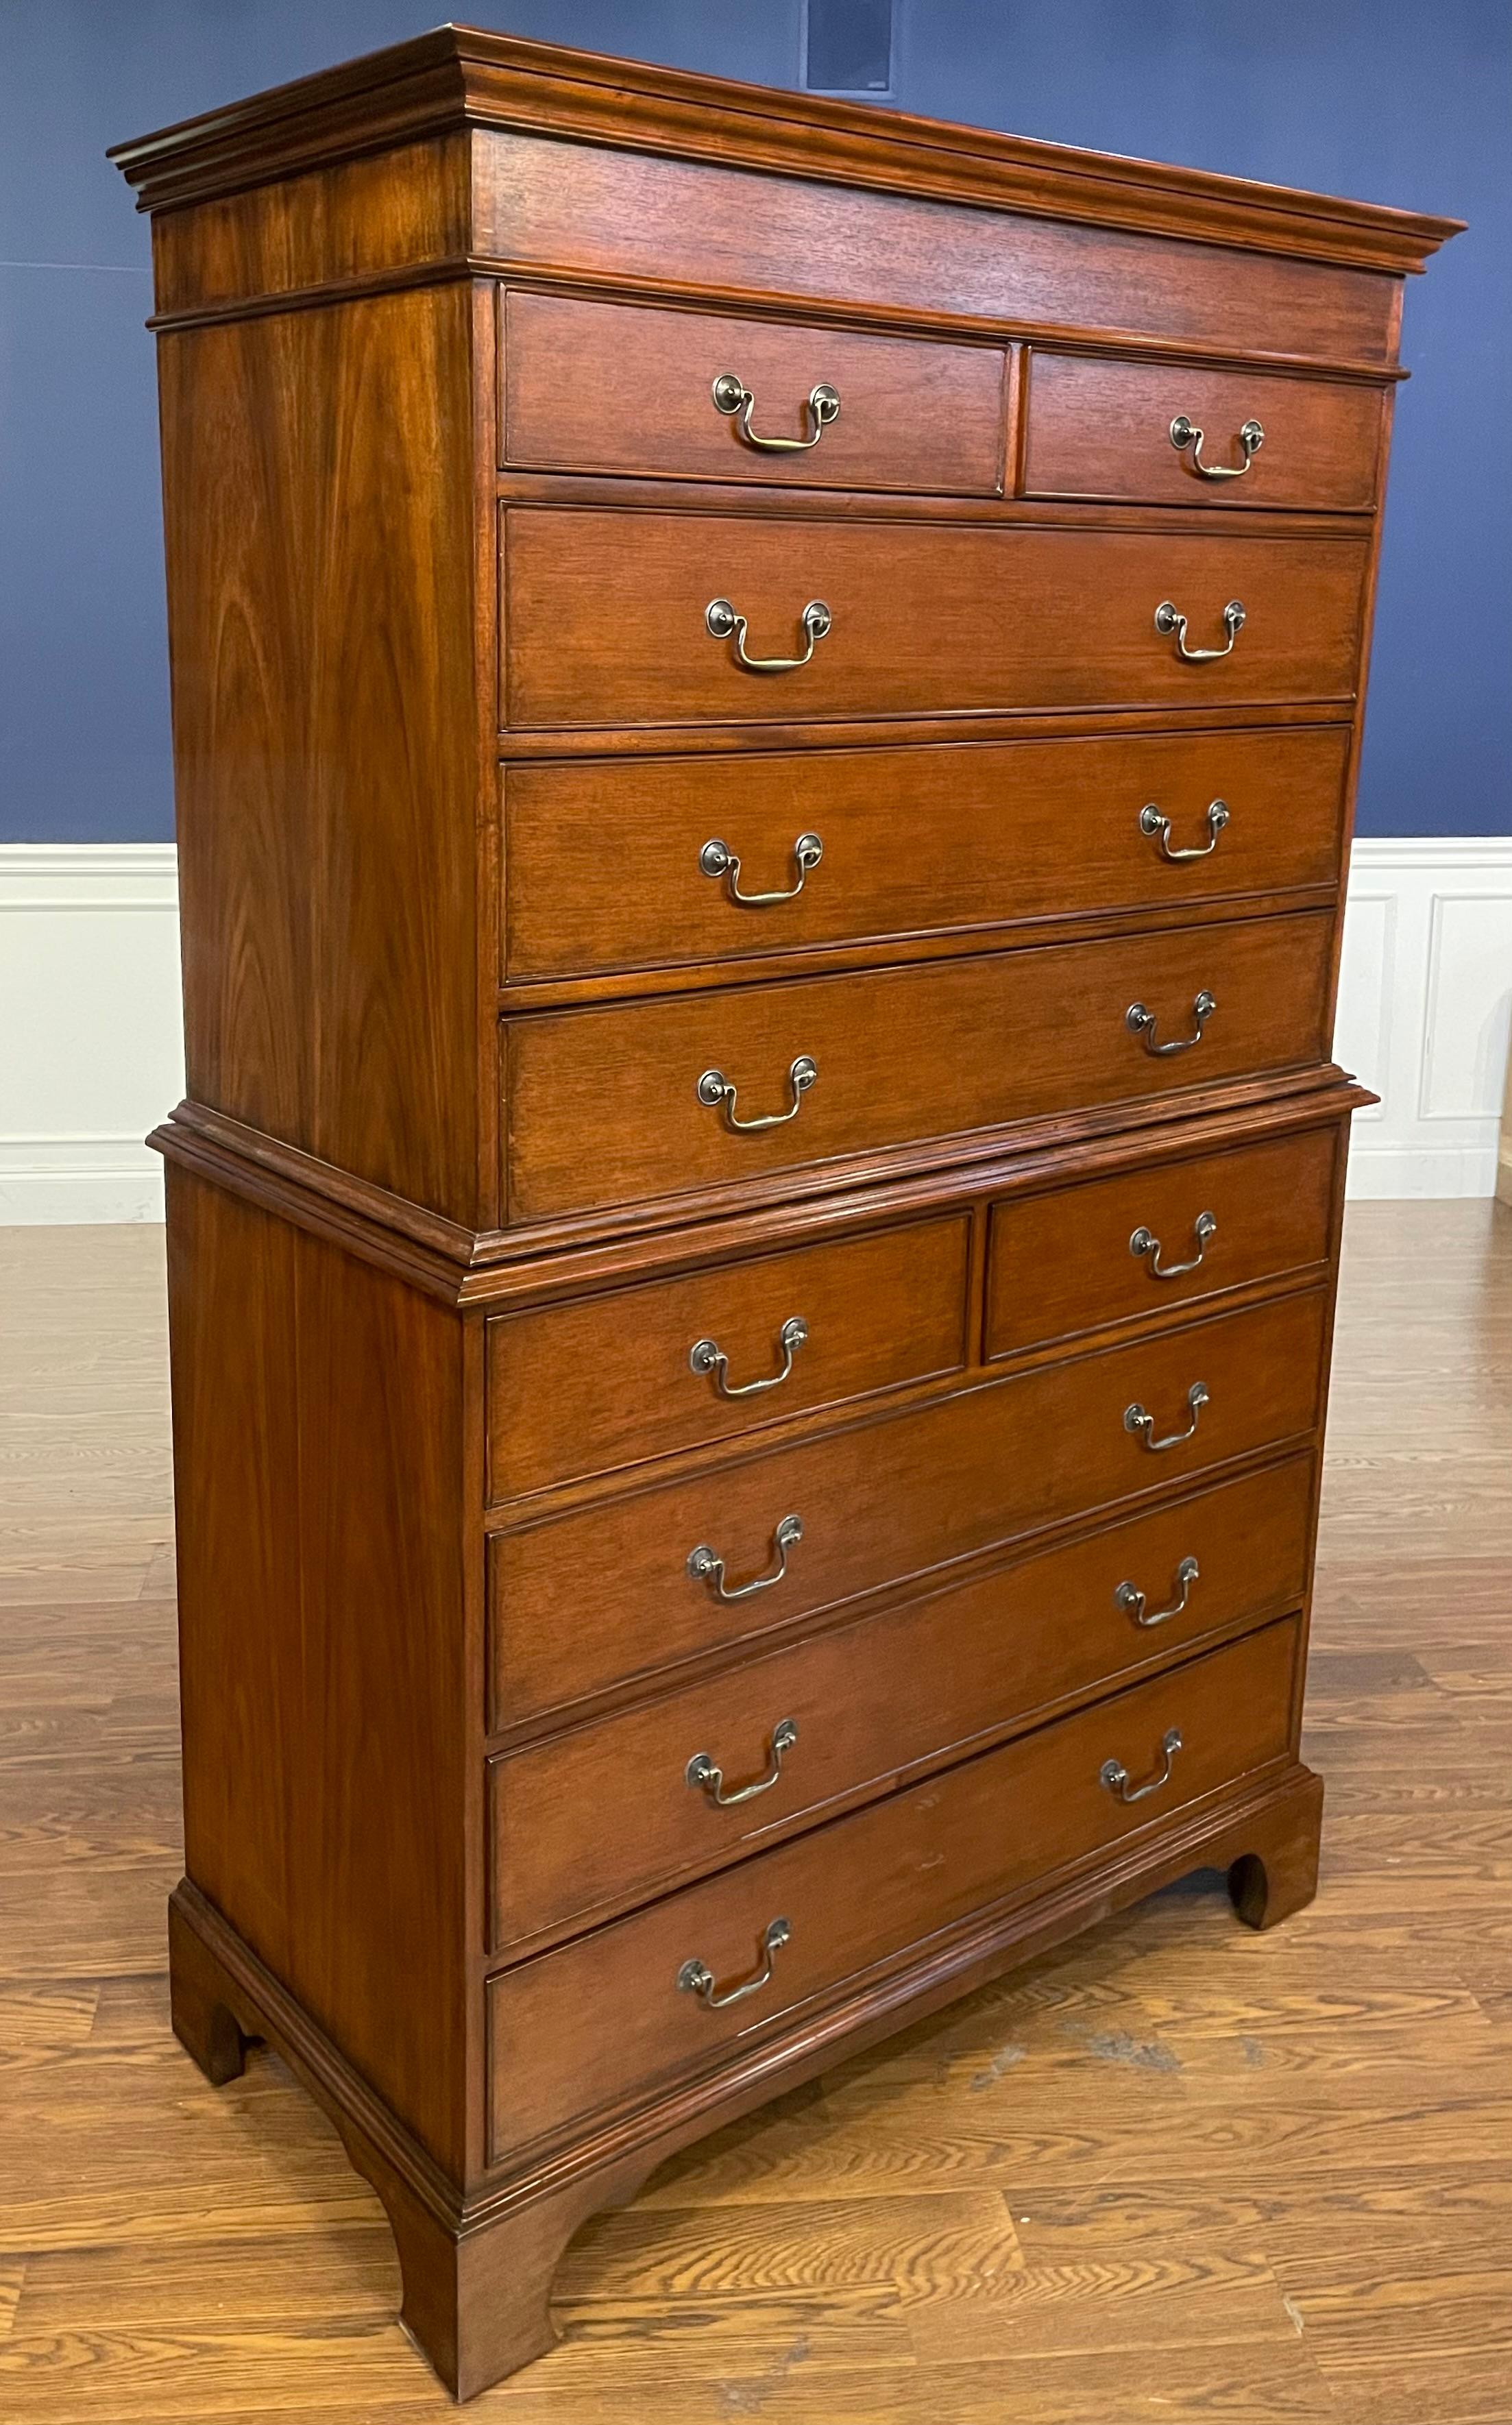 This is a traditional mahogany Chest-On-Chest by Leighton Hall Furniture.  It features classic Chippendale styling, ten dovetailed drawers and antique brass pulls.  It has a medium brown mahogany color with a satin finish.  This chest was used